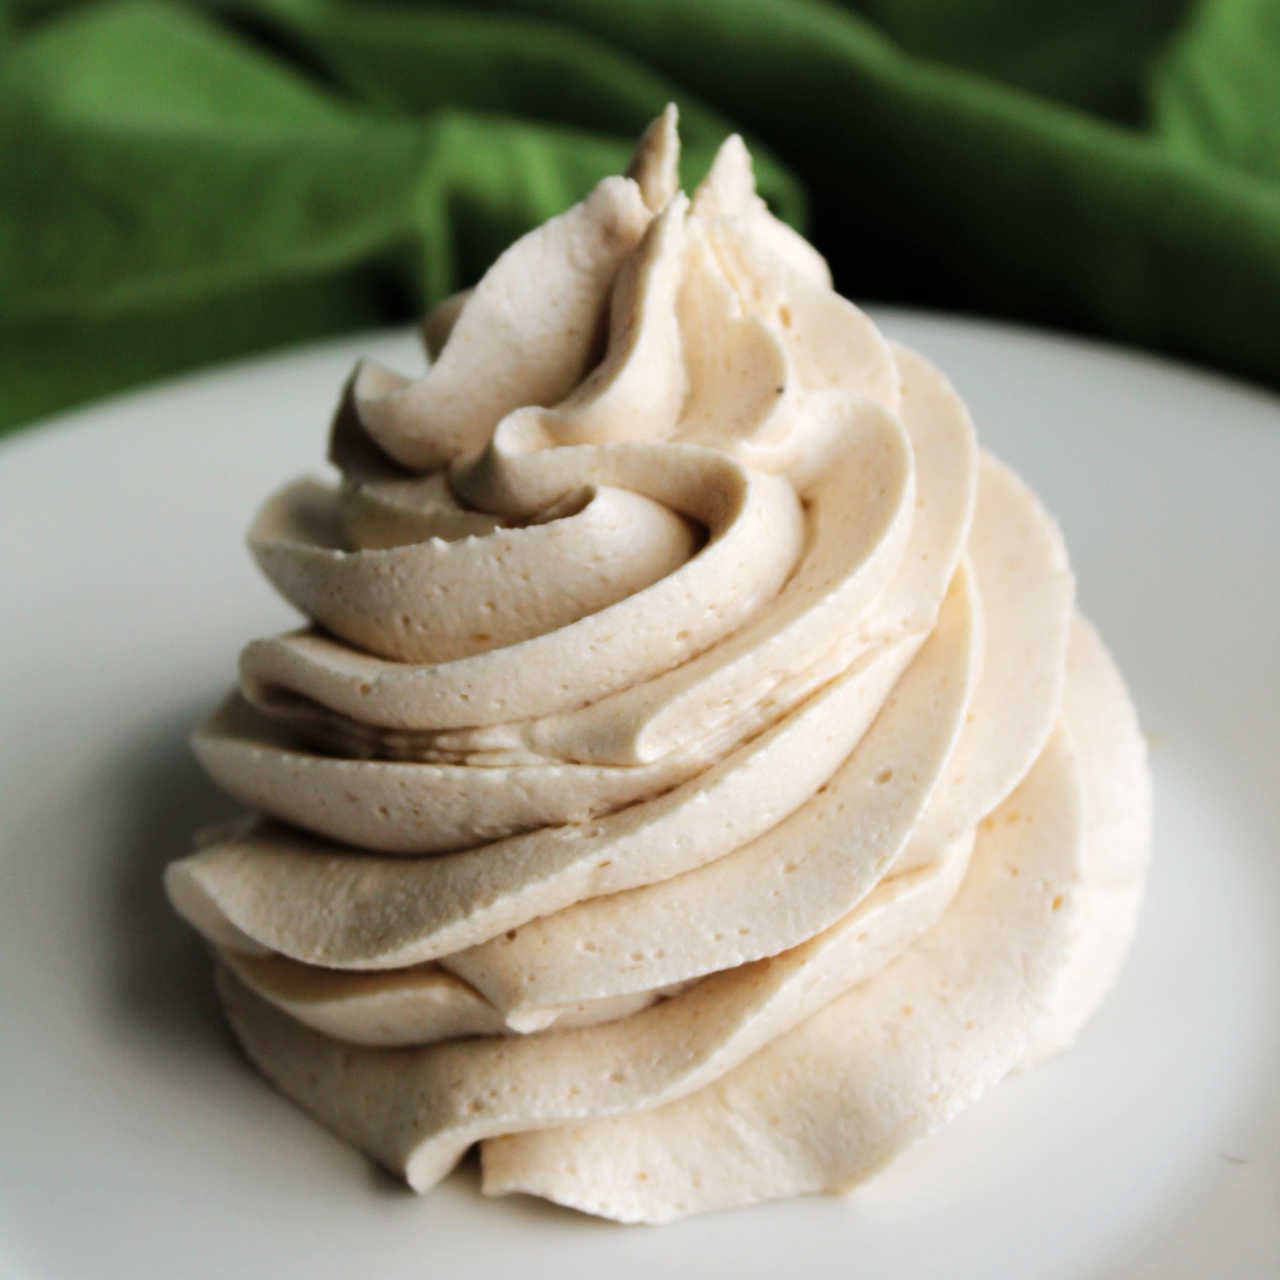 Large piped swirl of creamy apple butter buttercream frosting.